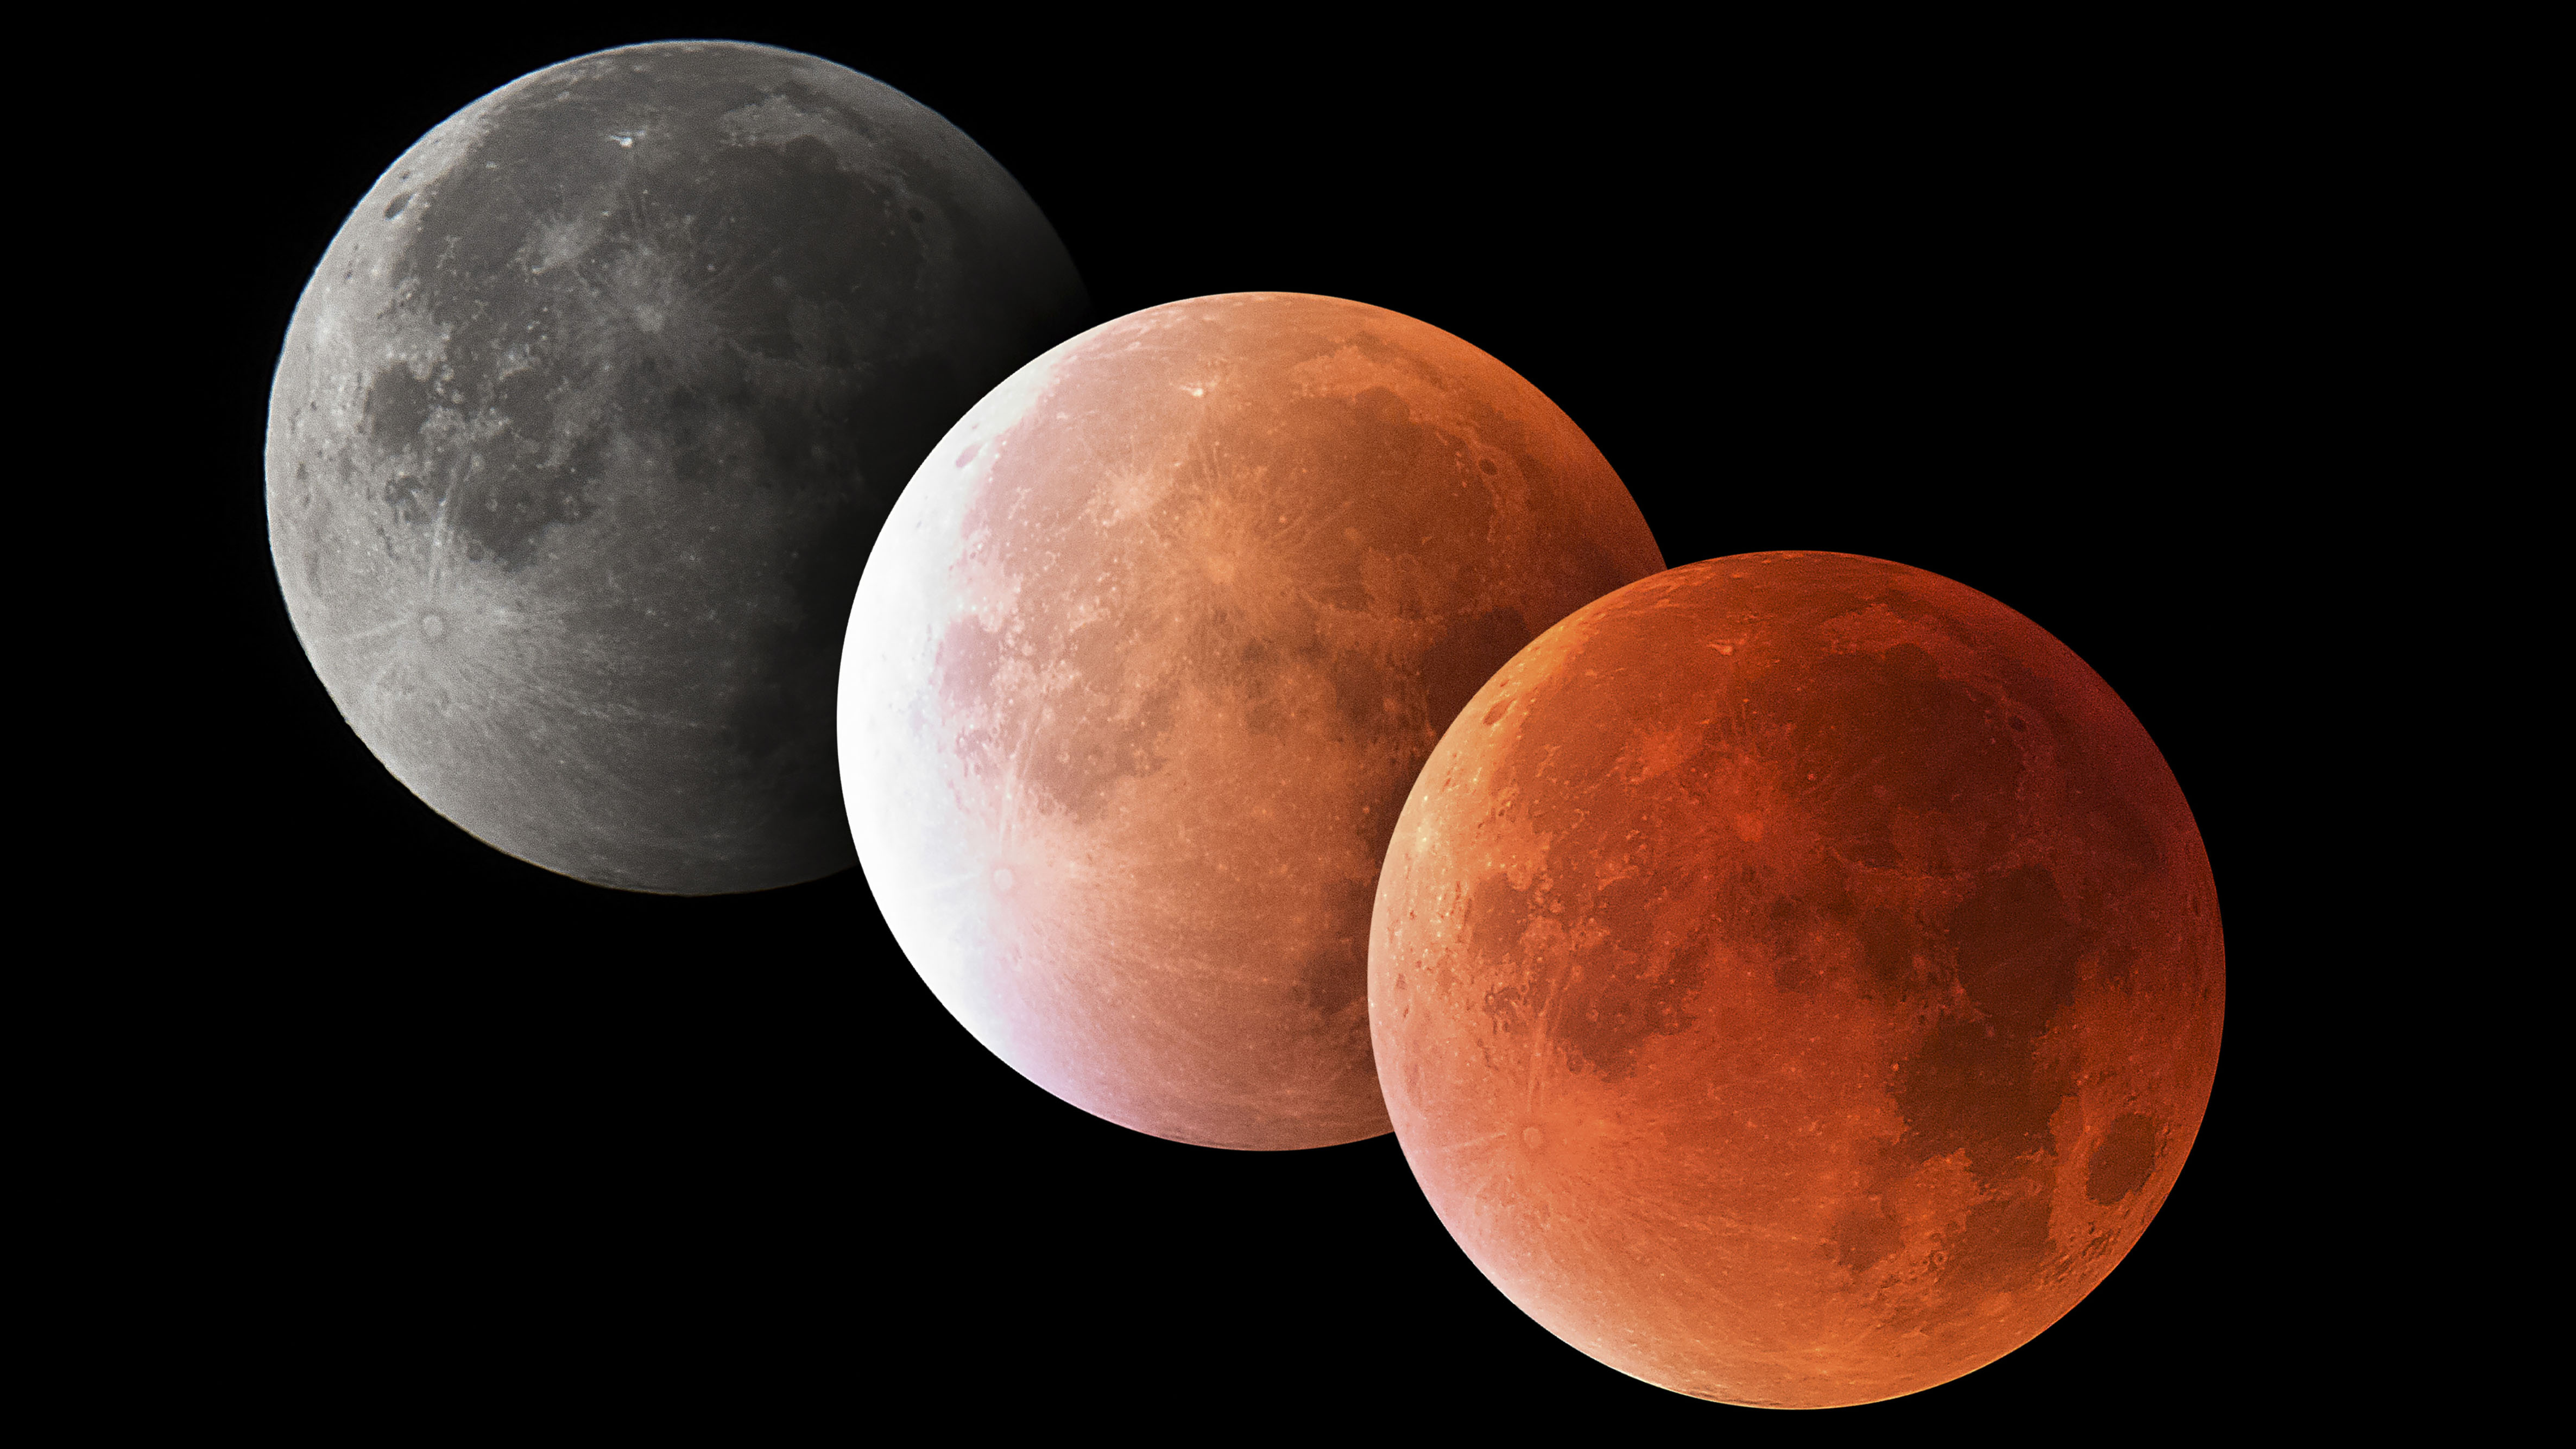 Phases of a lunar eclipse